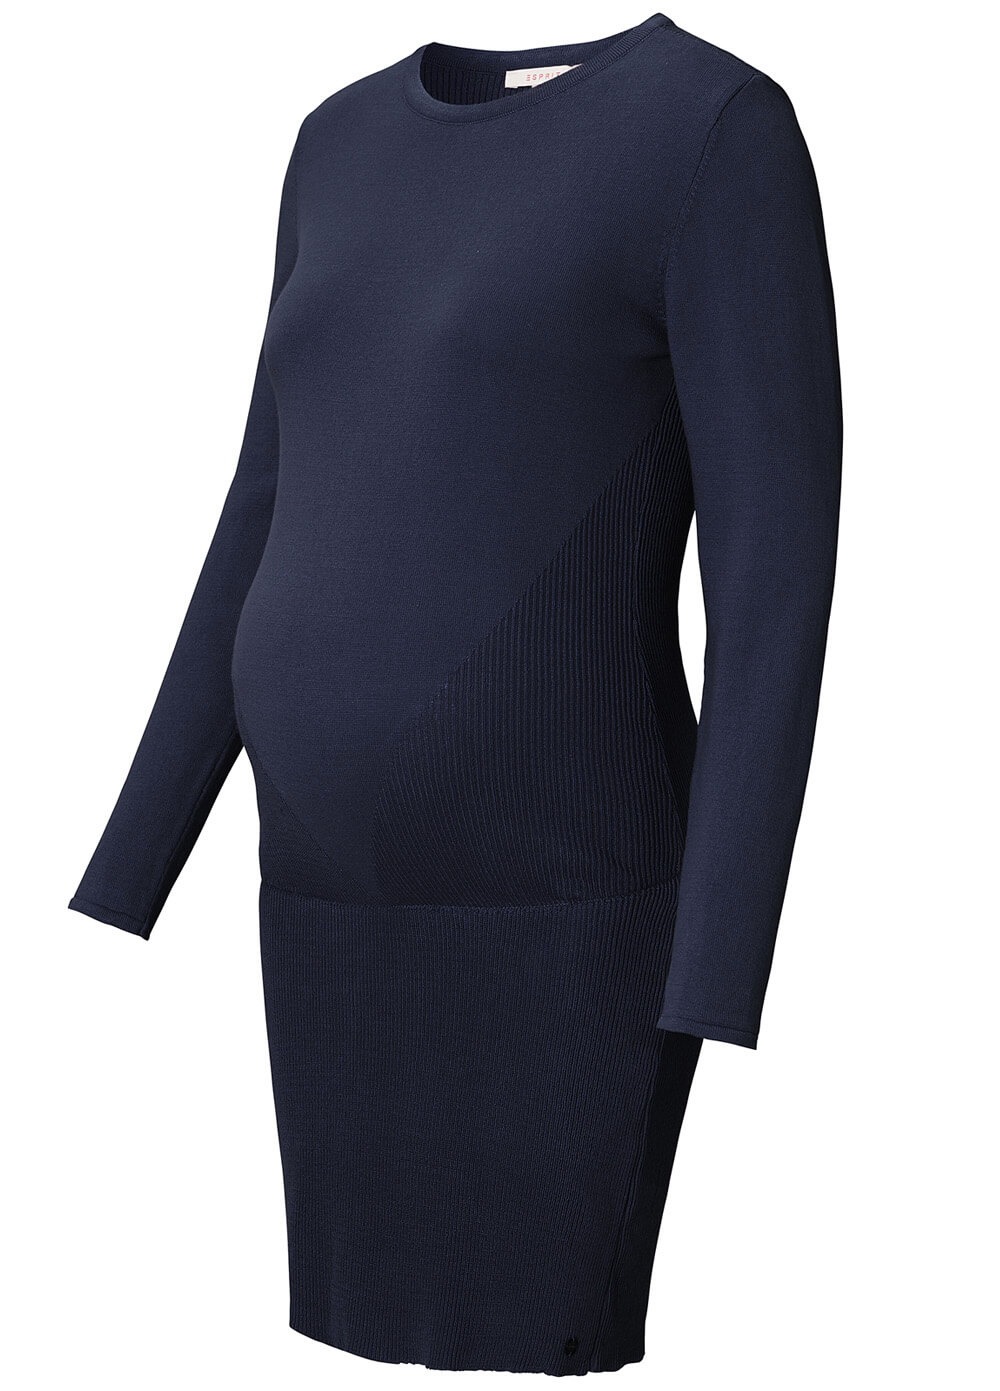 Textured Cotton Knit MaternityTunic in Night Blue by Esprit